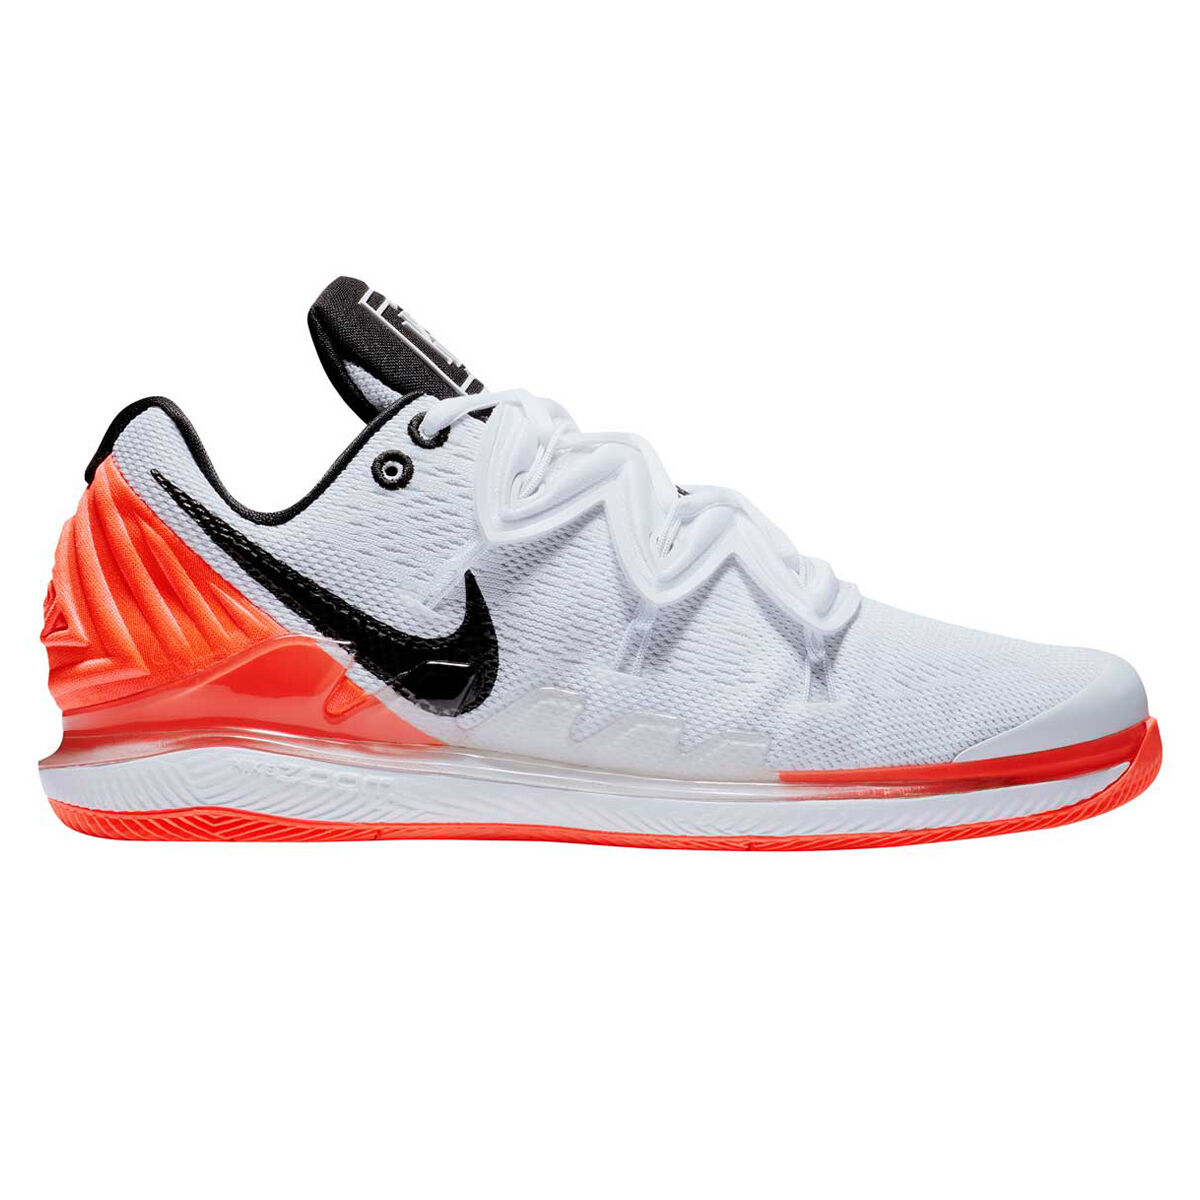 kyrie running shoes